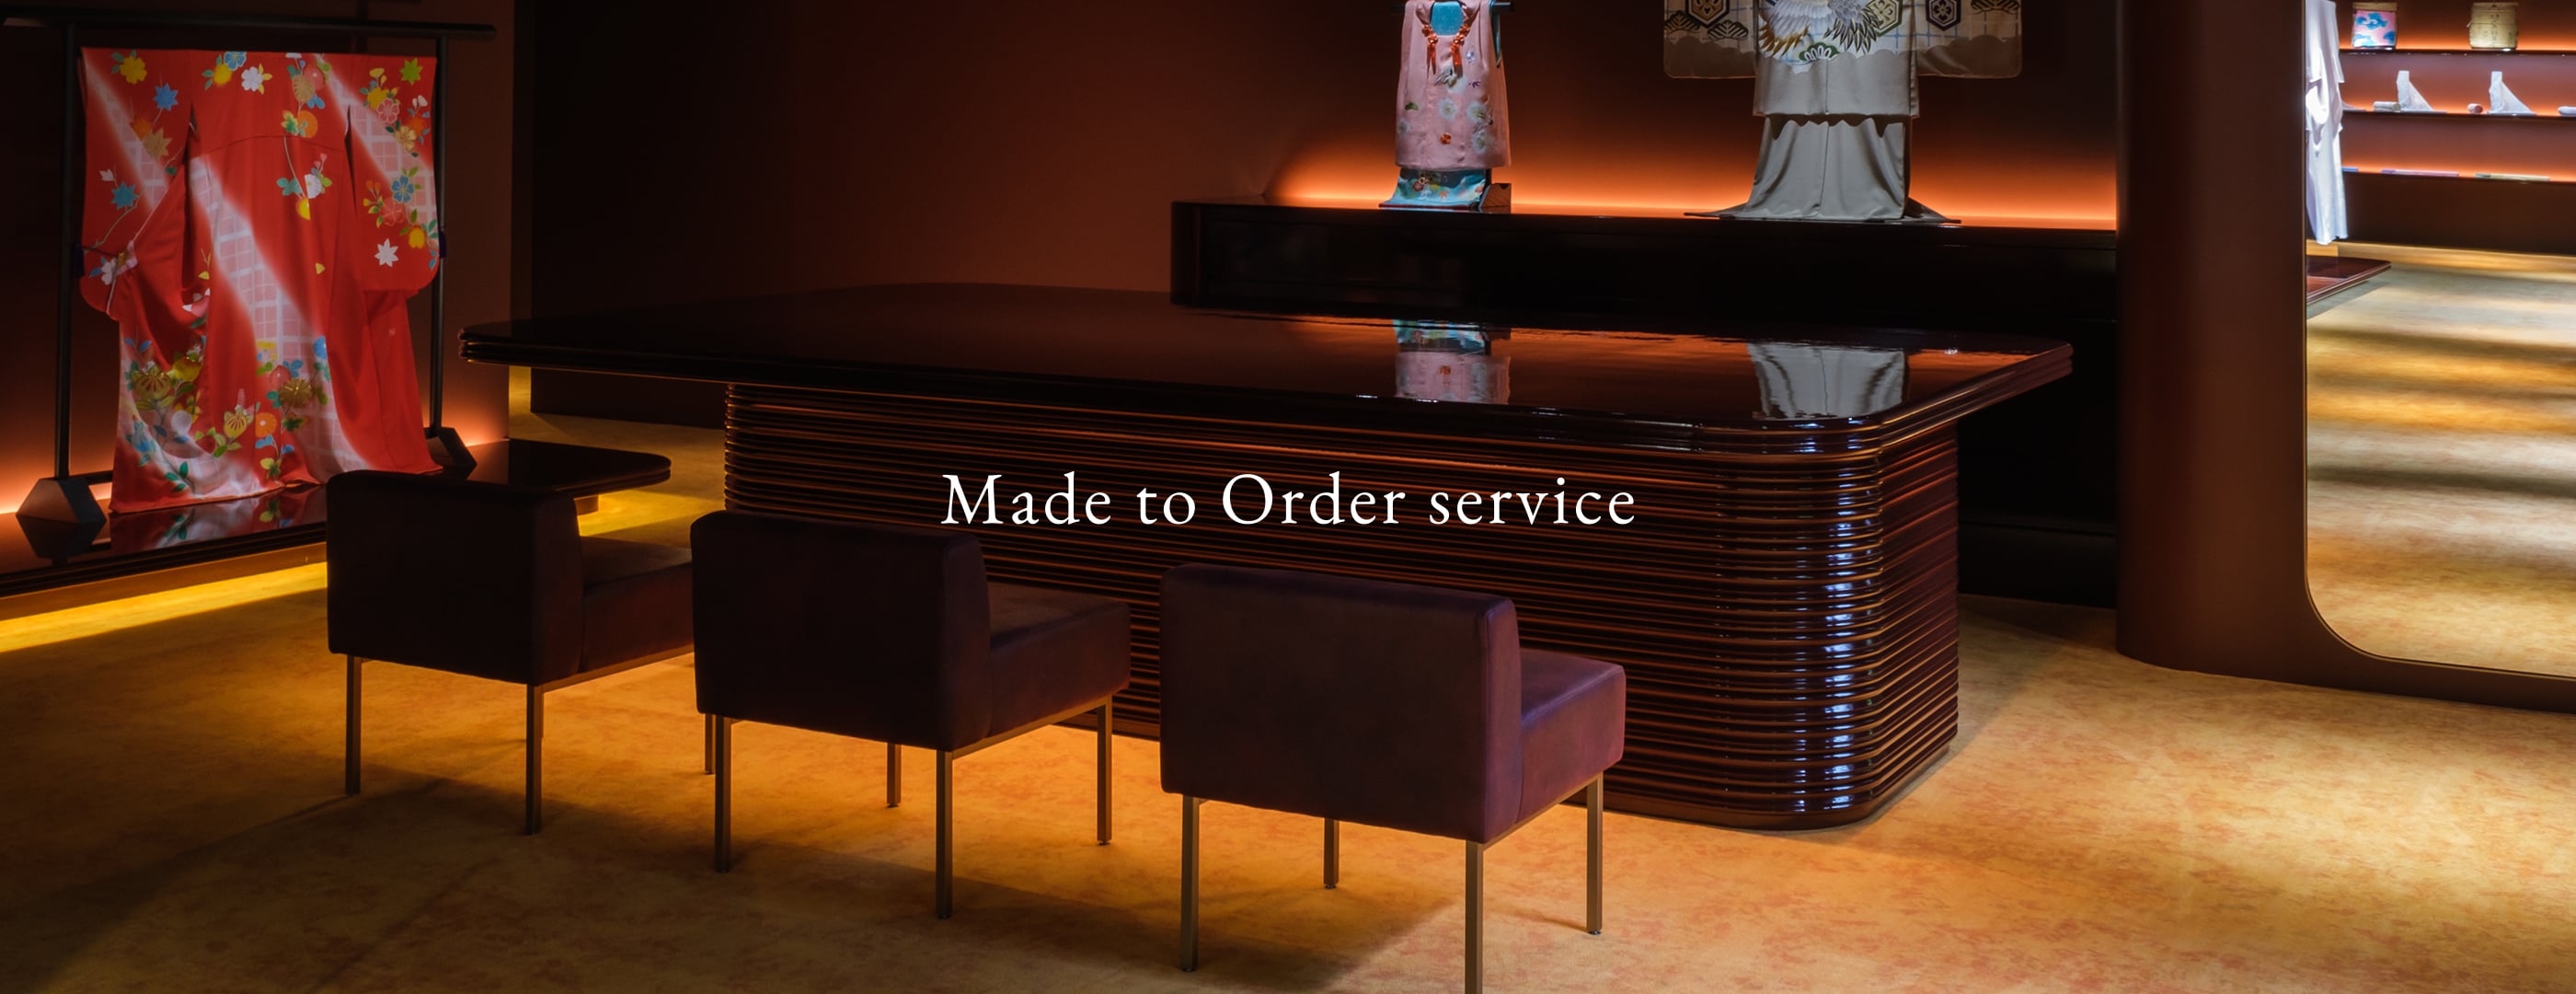 Made to Order service